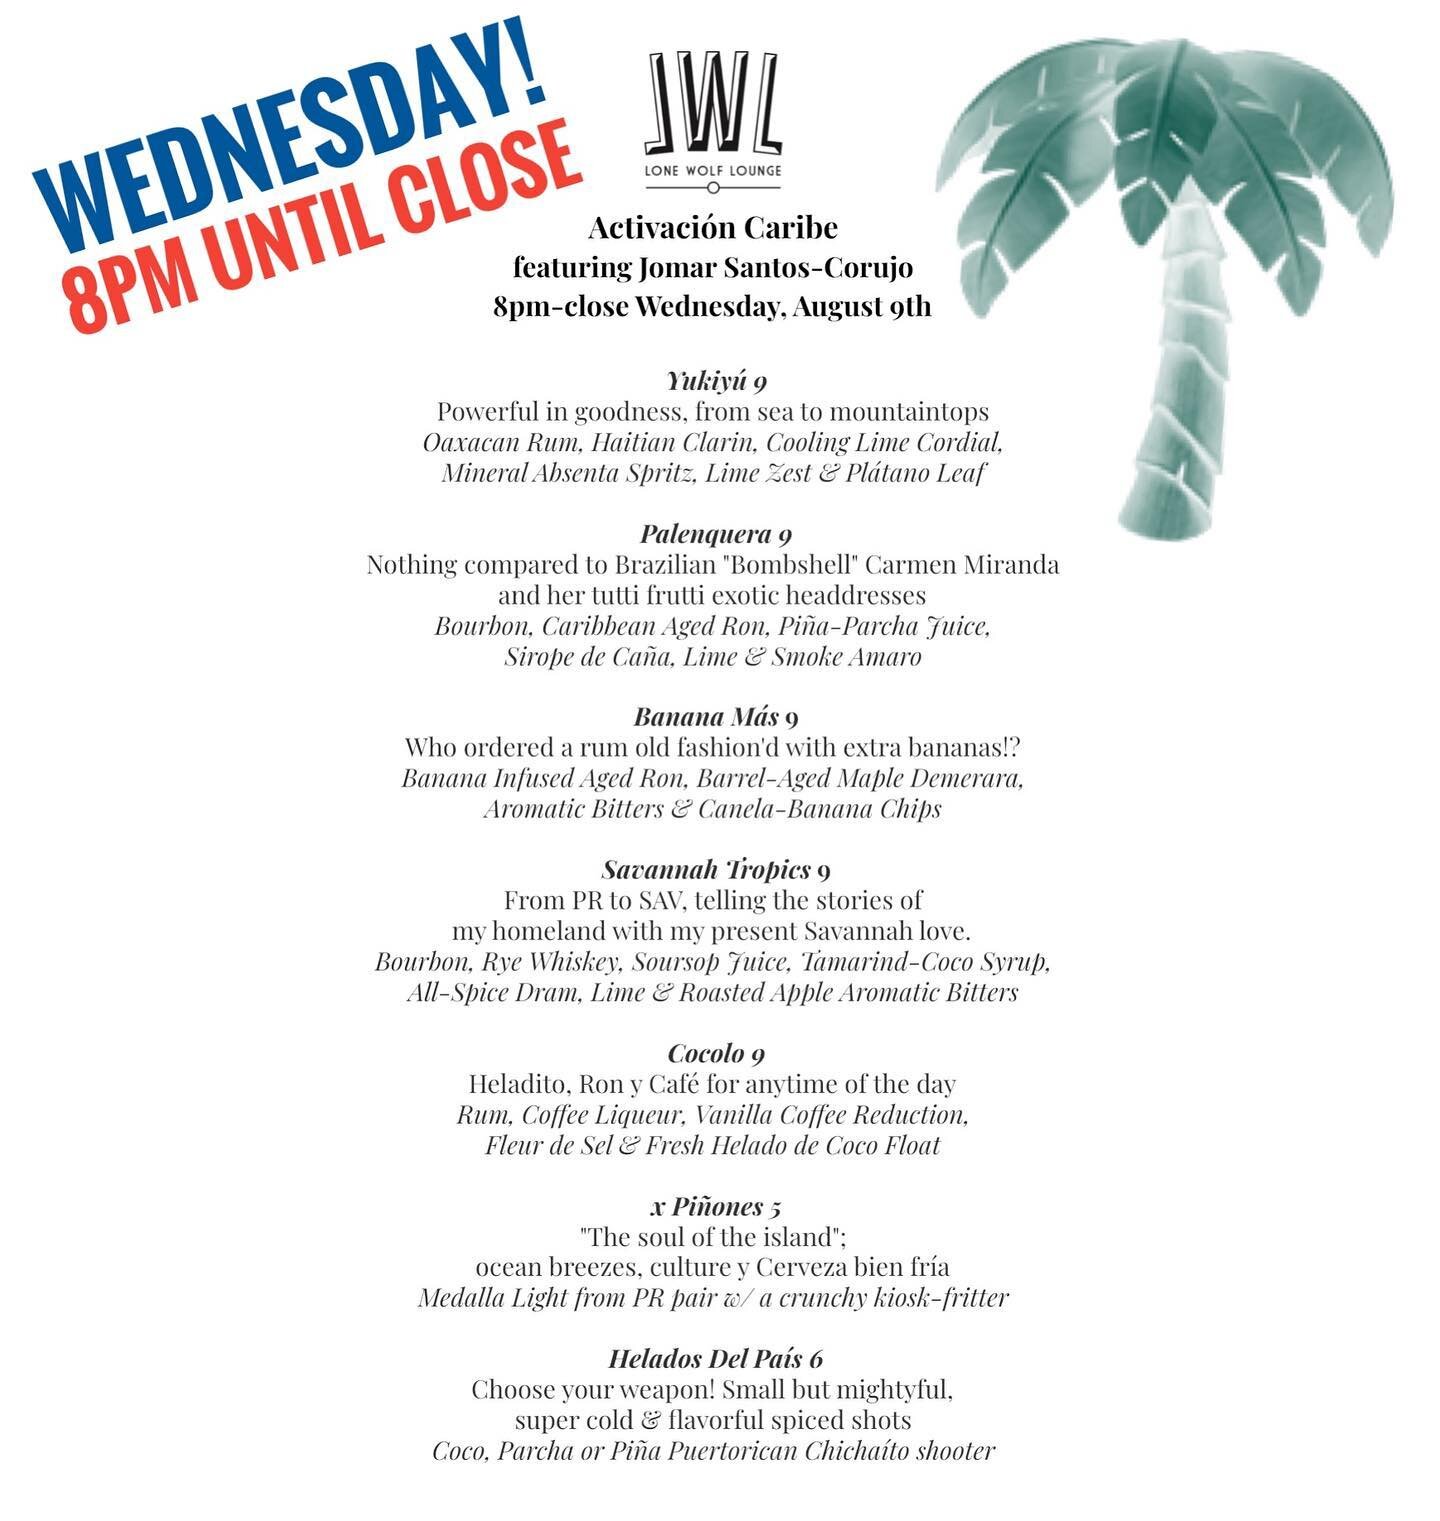 Grab a little staycation in the neighborhood with🇵🇷 @jomix.santos tomorrow (Wednesday) Check out this fresh &amp; delicious menu, and don't forget to get a sip of @rondelbarrilito with the man behind the stick! 🥃 Menu goes from 8pm - close and kar